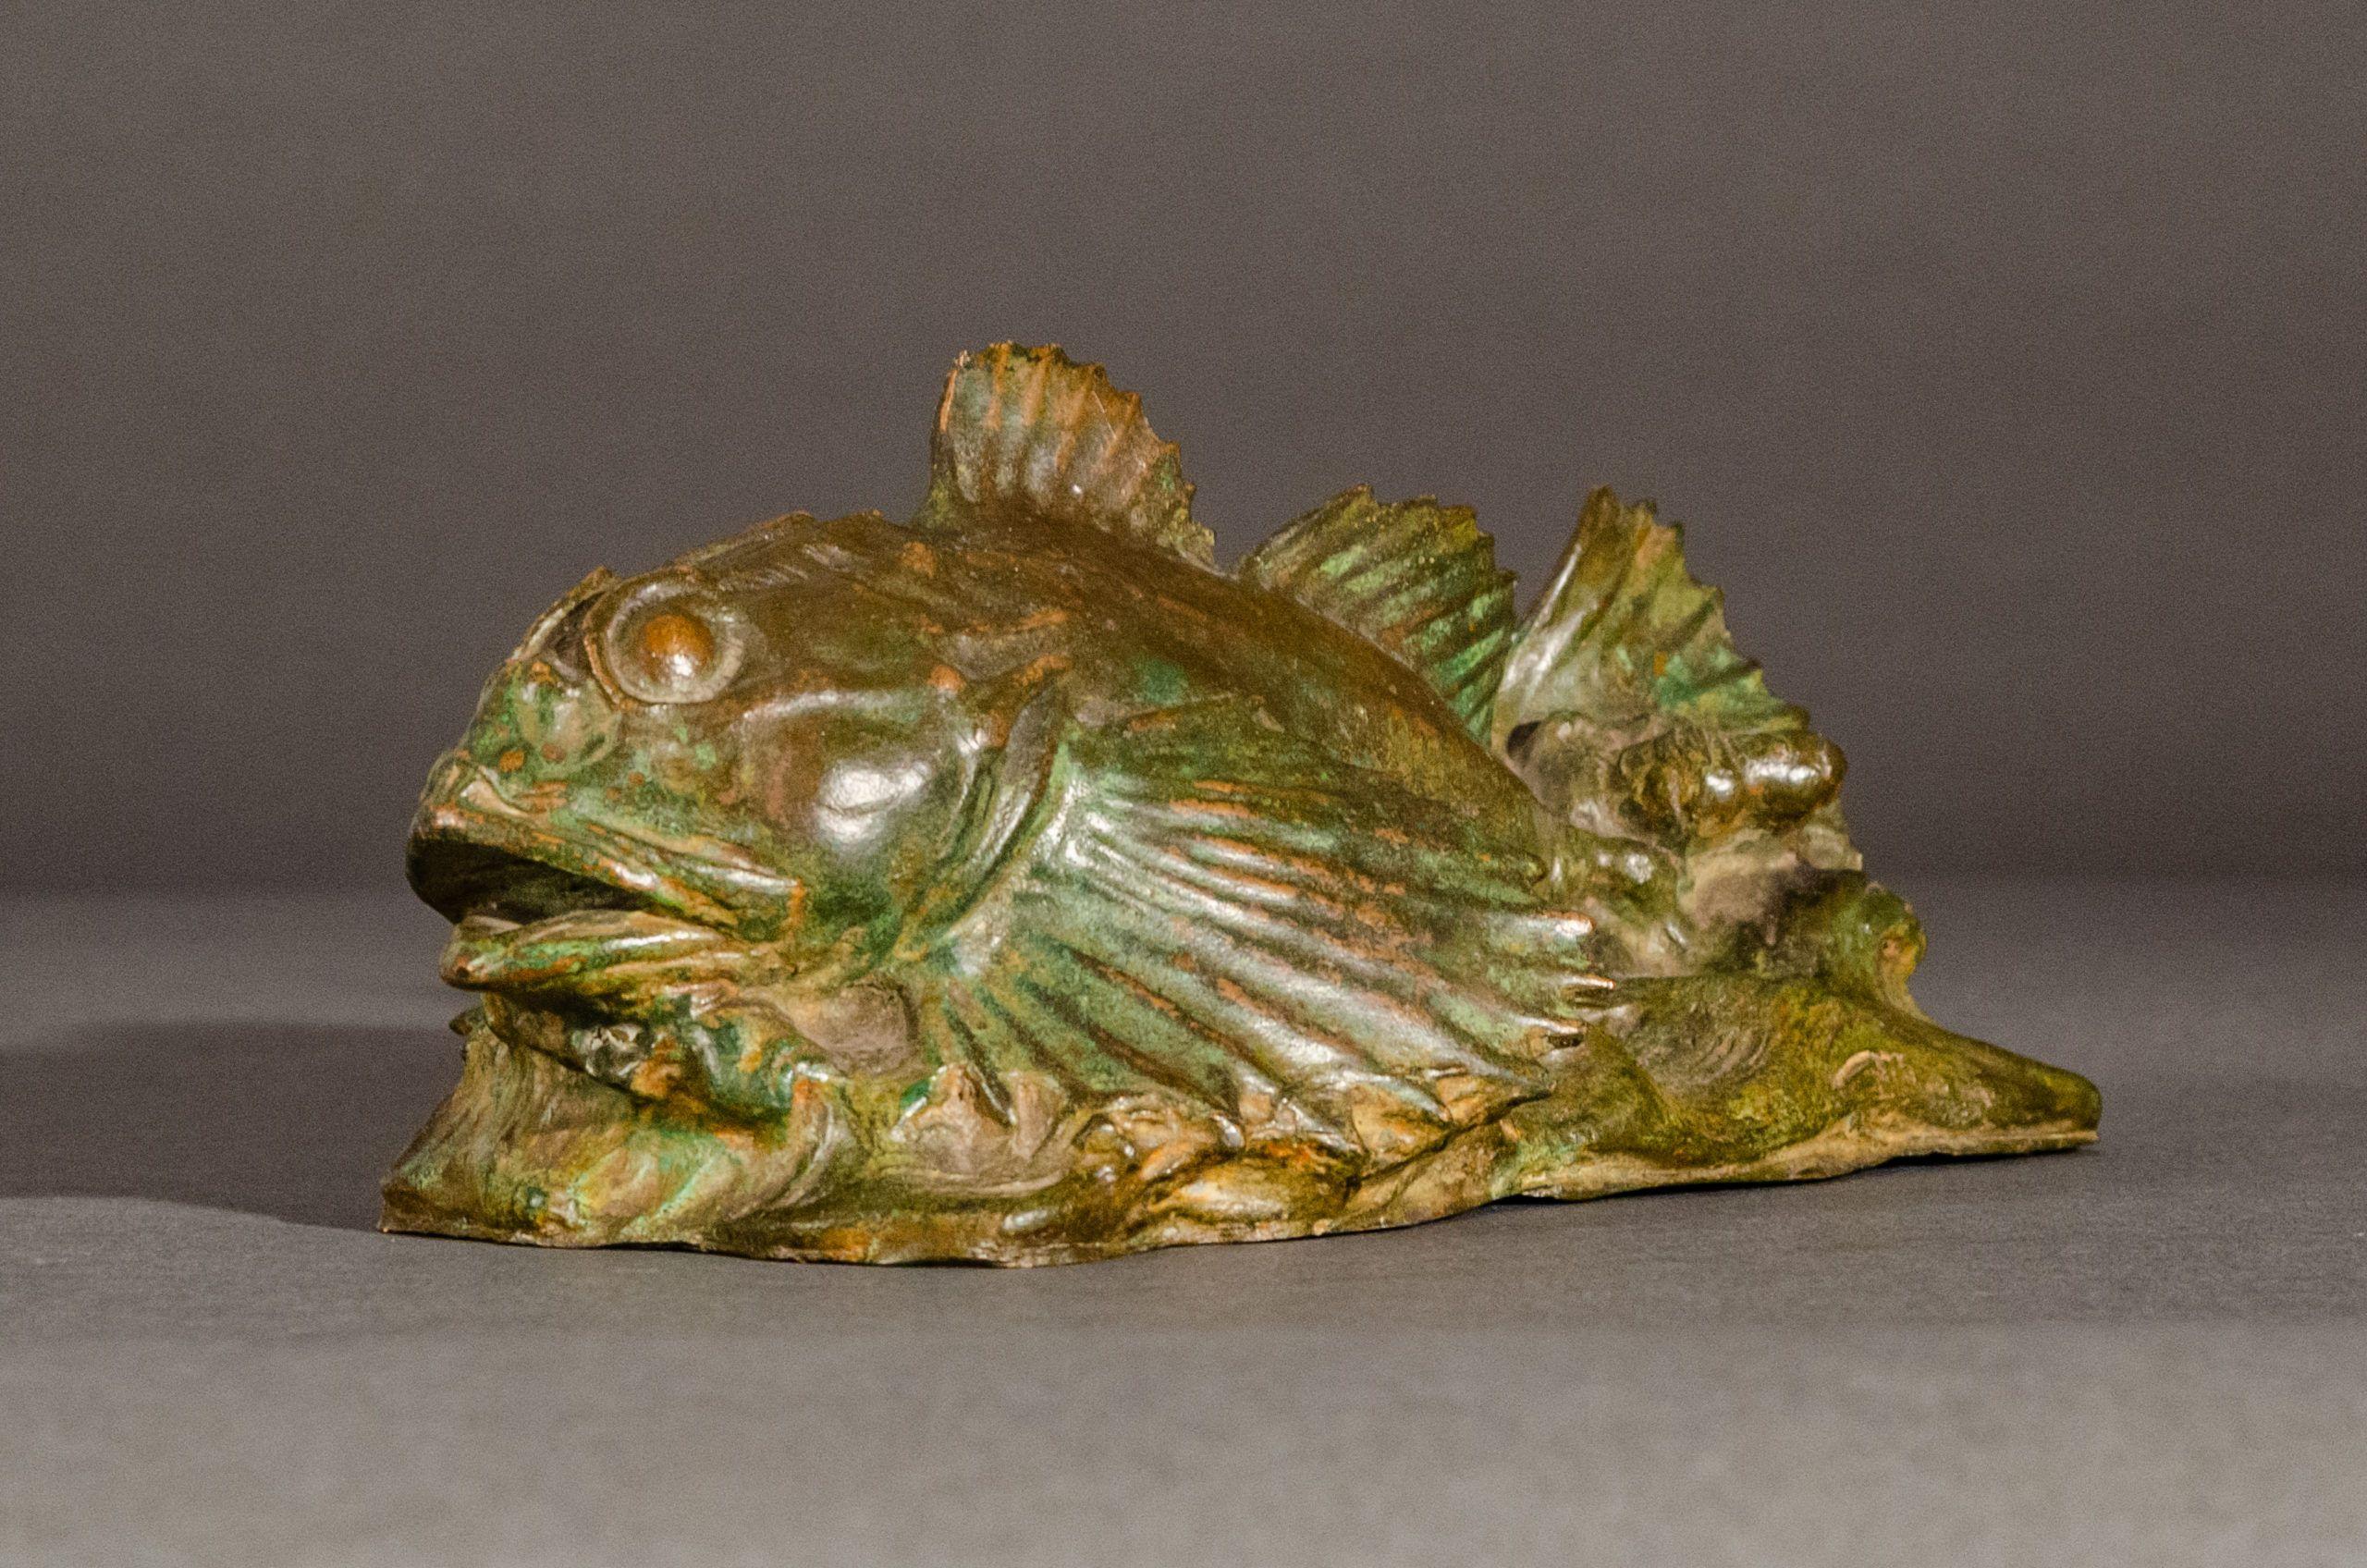 Paul W. Bartlett
Sculpin Fish, 1896
Signed on base: PWB ’96
Stamped on base: SF
Bronze
4 3/4 H. x 10 W. inches

Known as a leading Beaux-Art sculptor, Paul Wayland Bartlett began his career specializing in animals and then turned to public portrait